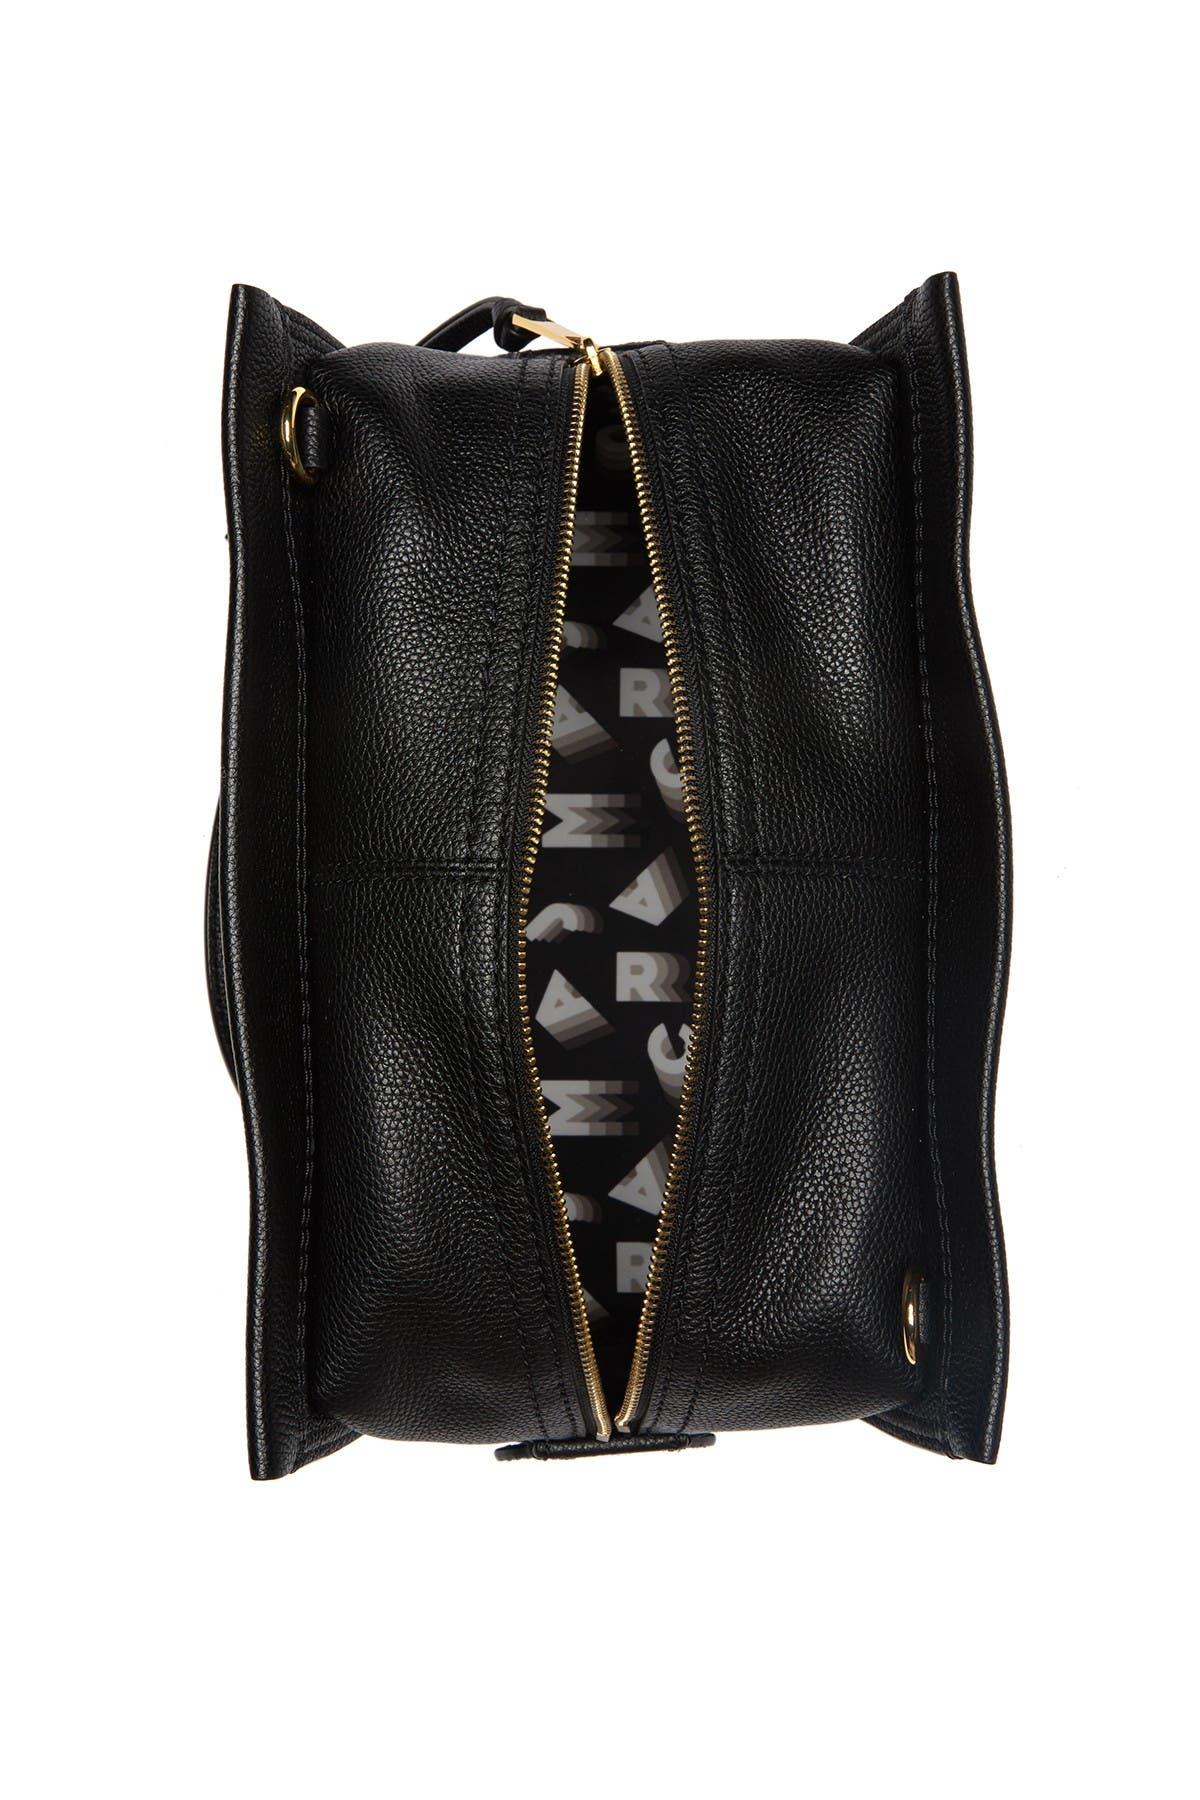 Marc Jacobs Cruiser Leather Satchel in Black | Lyst